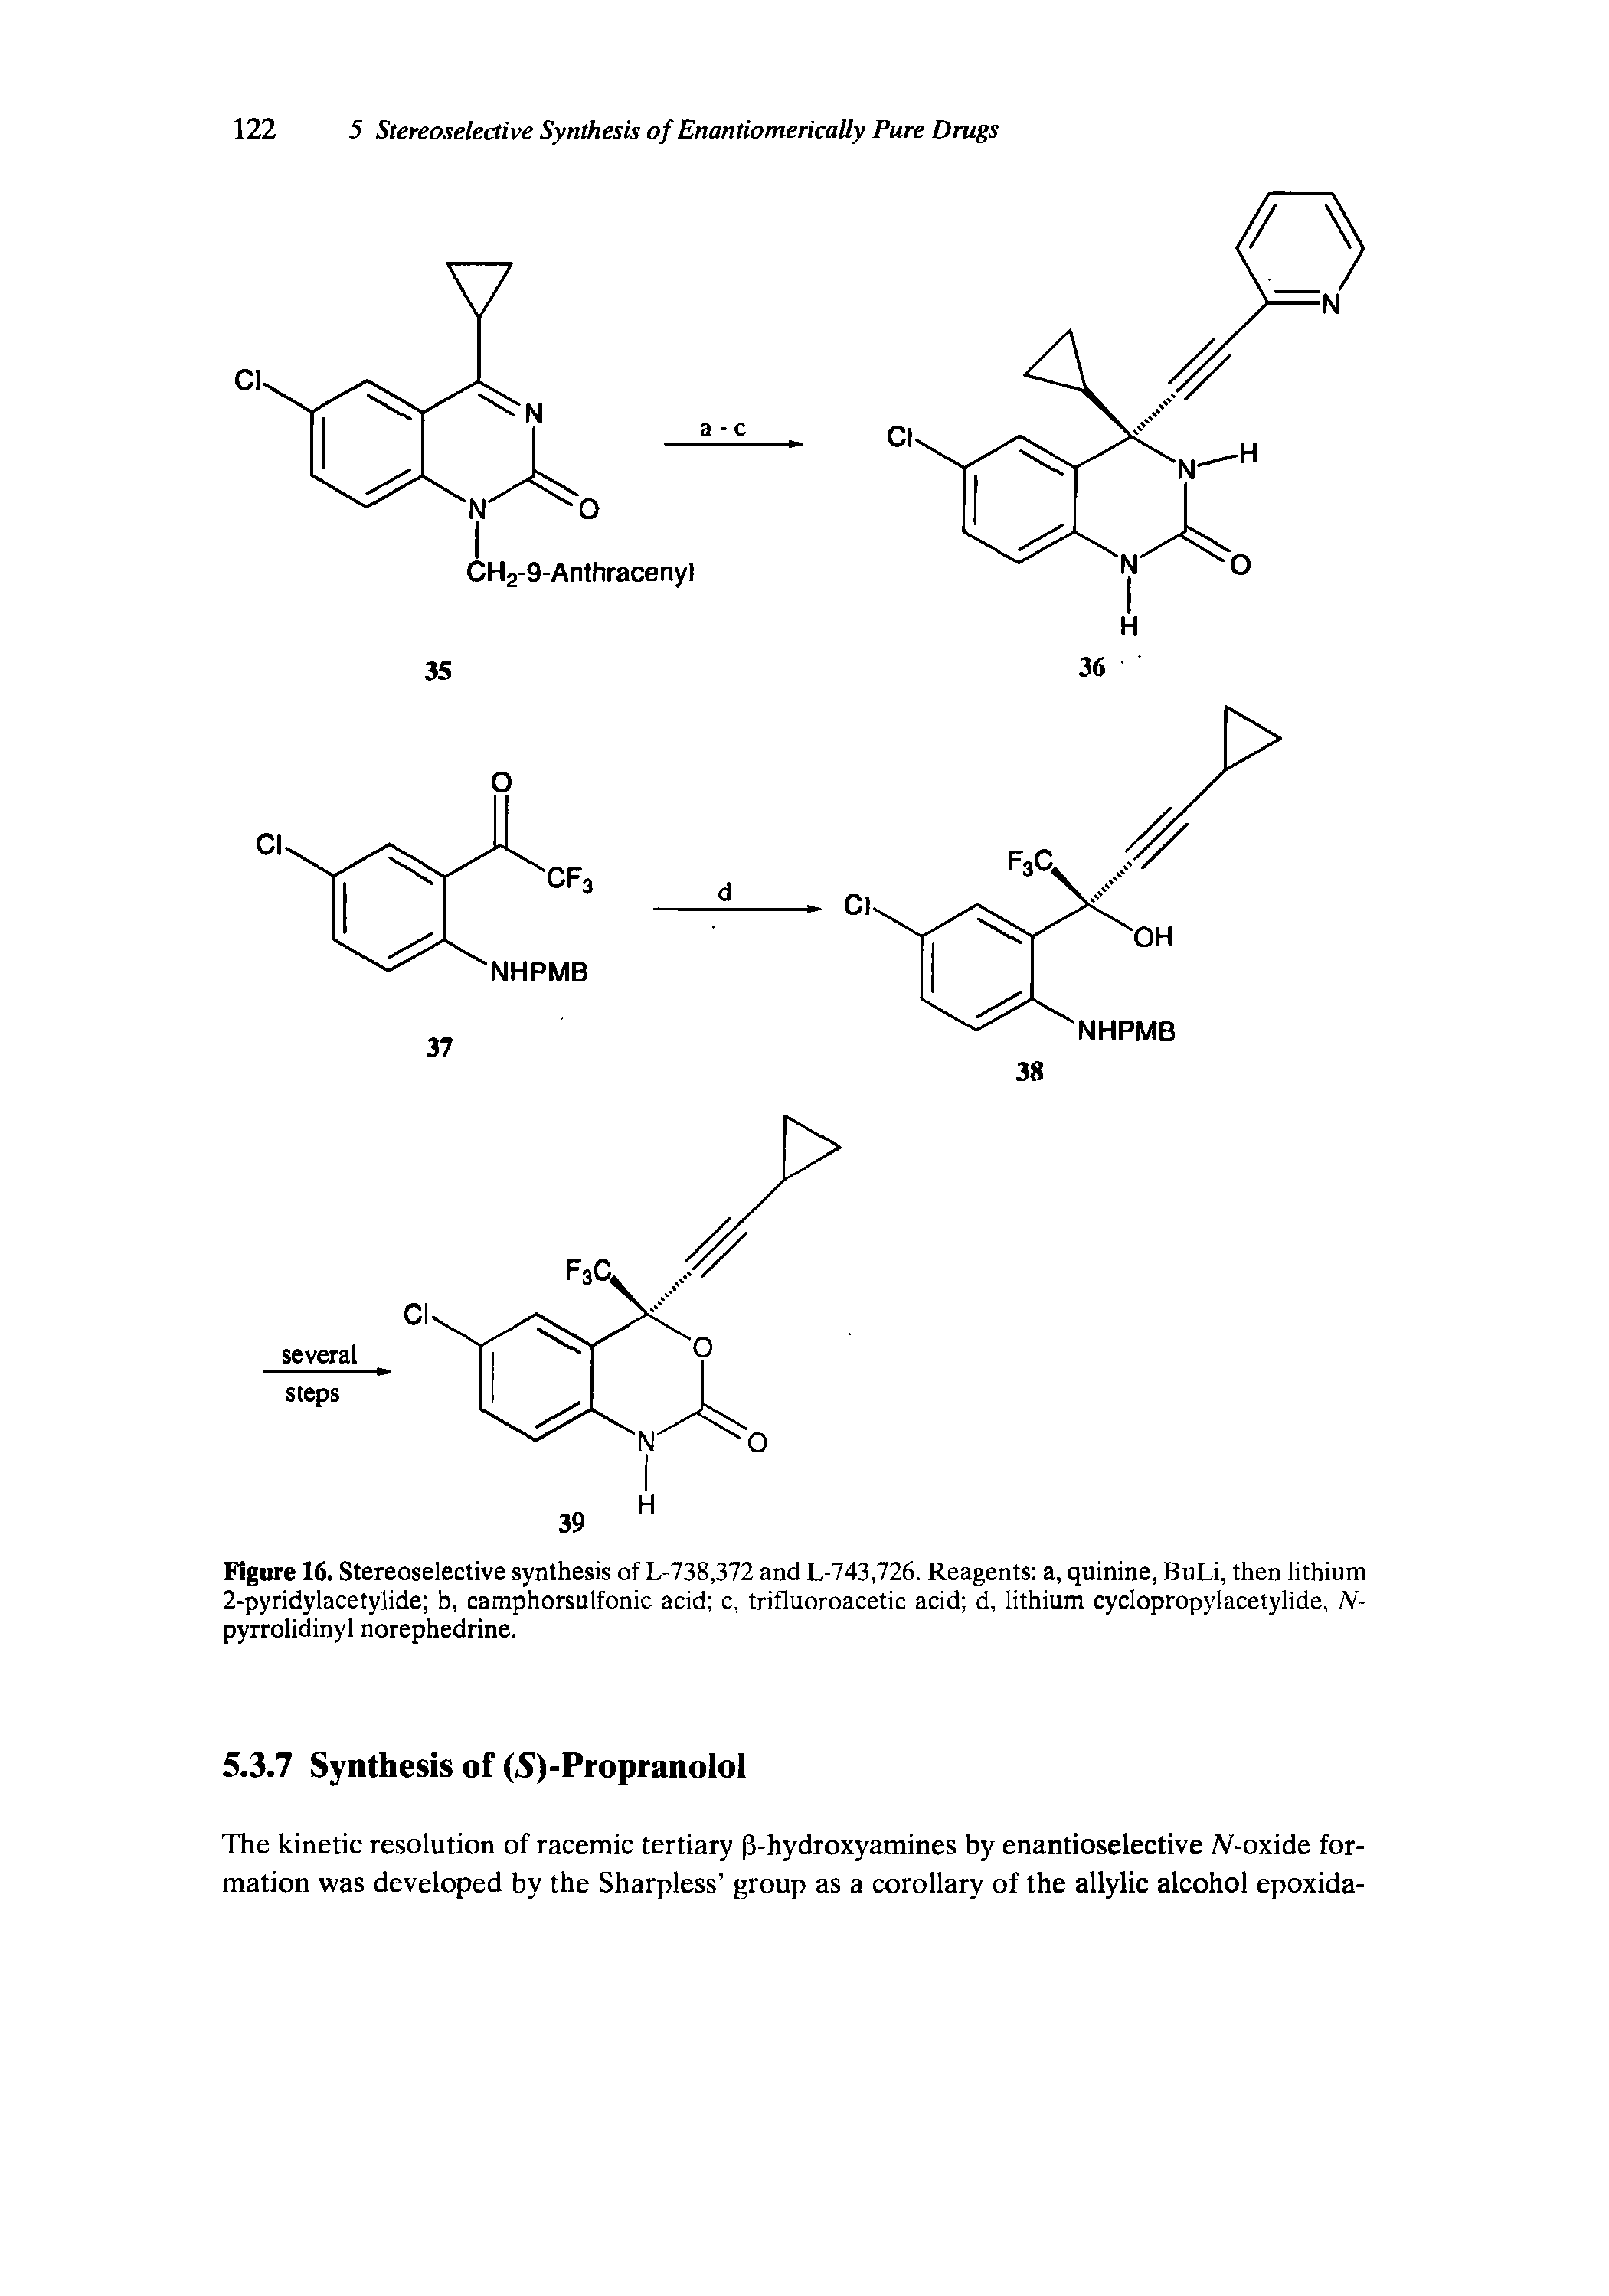 Figure 16. Stereoselective synthesis of L-738,372 and L-743,726. Reagents a, quinine, BuLi, then lithium 2-pyridylacetylide b, camphorsulfonic acid c, trifluoroacetic acid d, lithium cyclopropylacetylide, N-pyrrolidinyl norephedrine.